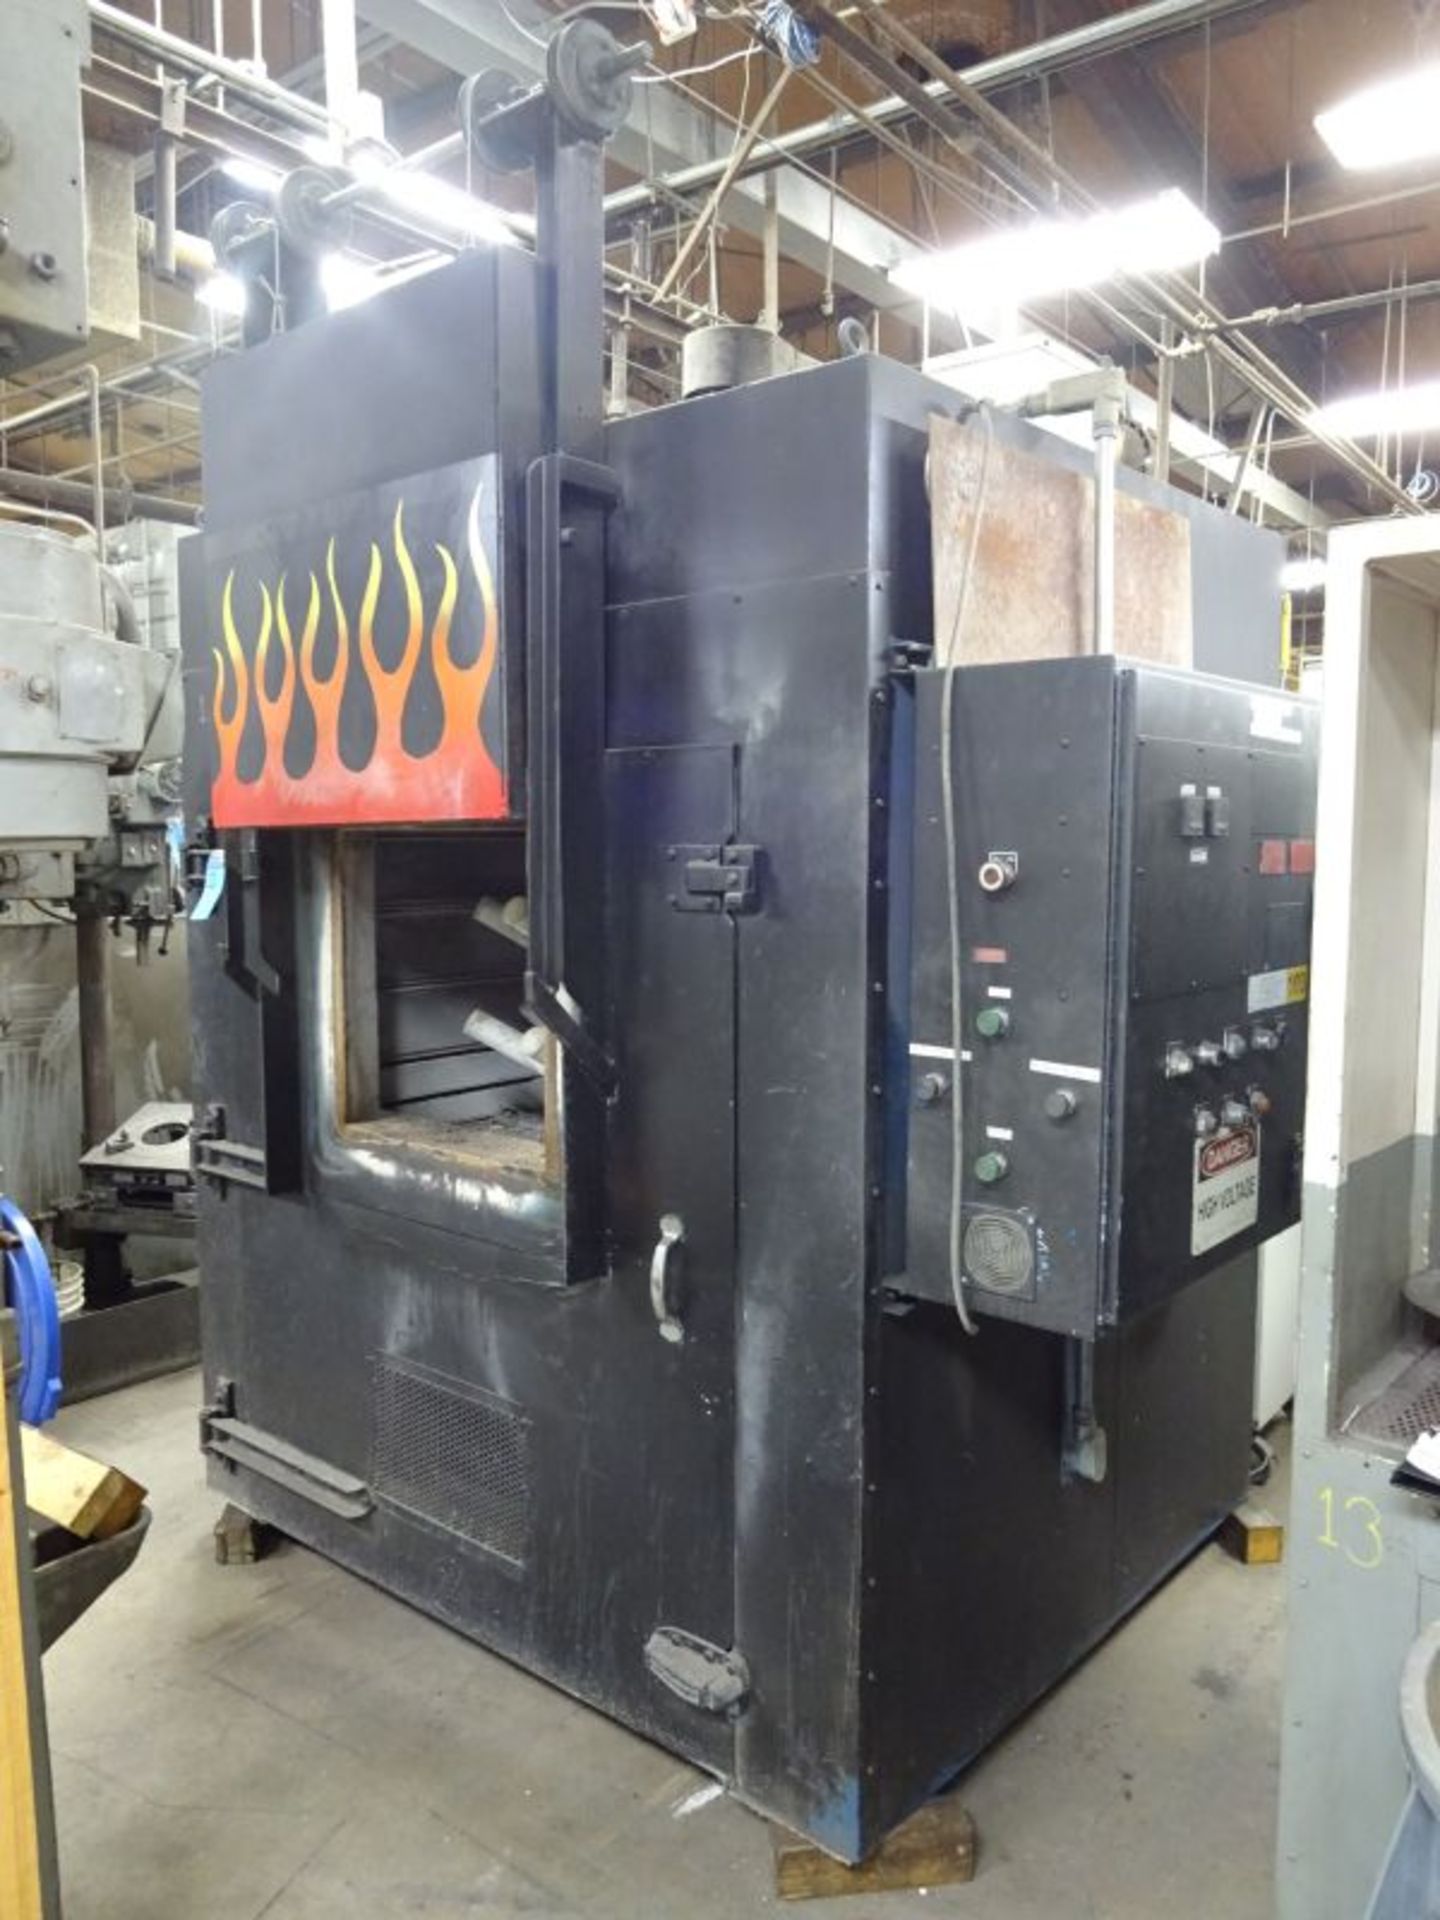 48" X 48" X 28" Engineered Products Sale Corp. Model P800HV80 Electric Batch Oven; S/N 605, 23.5"